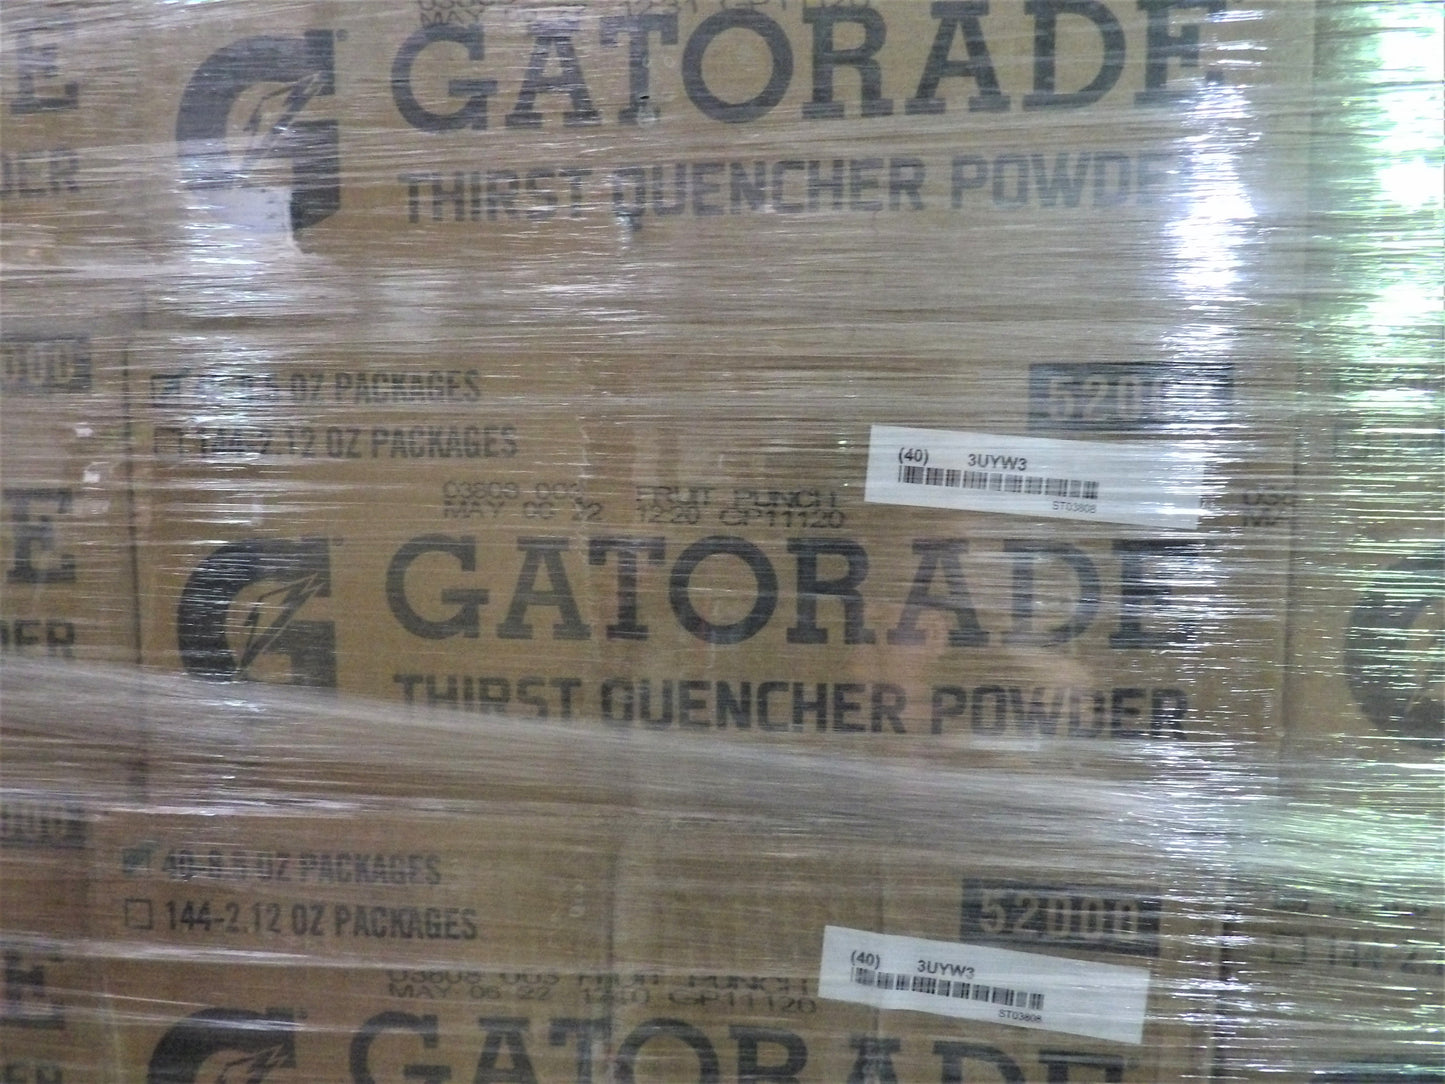 GATORADE Sports Drink Mix: Fruit Punch, Regular, 1 gal Yield per Unit, 8.5 oz Thirst Quencher Pack Size, Case of 40, FREE SHIPPING (CR00760-WH3uyw3)